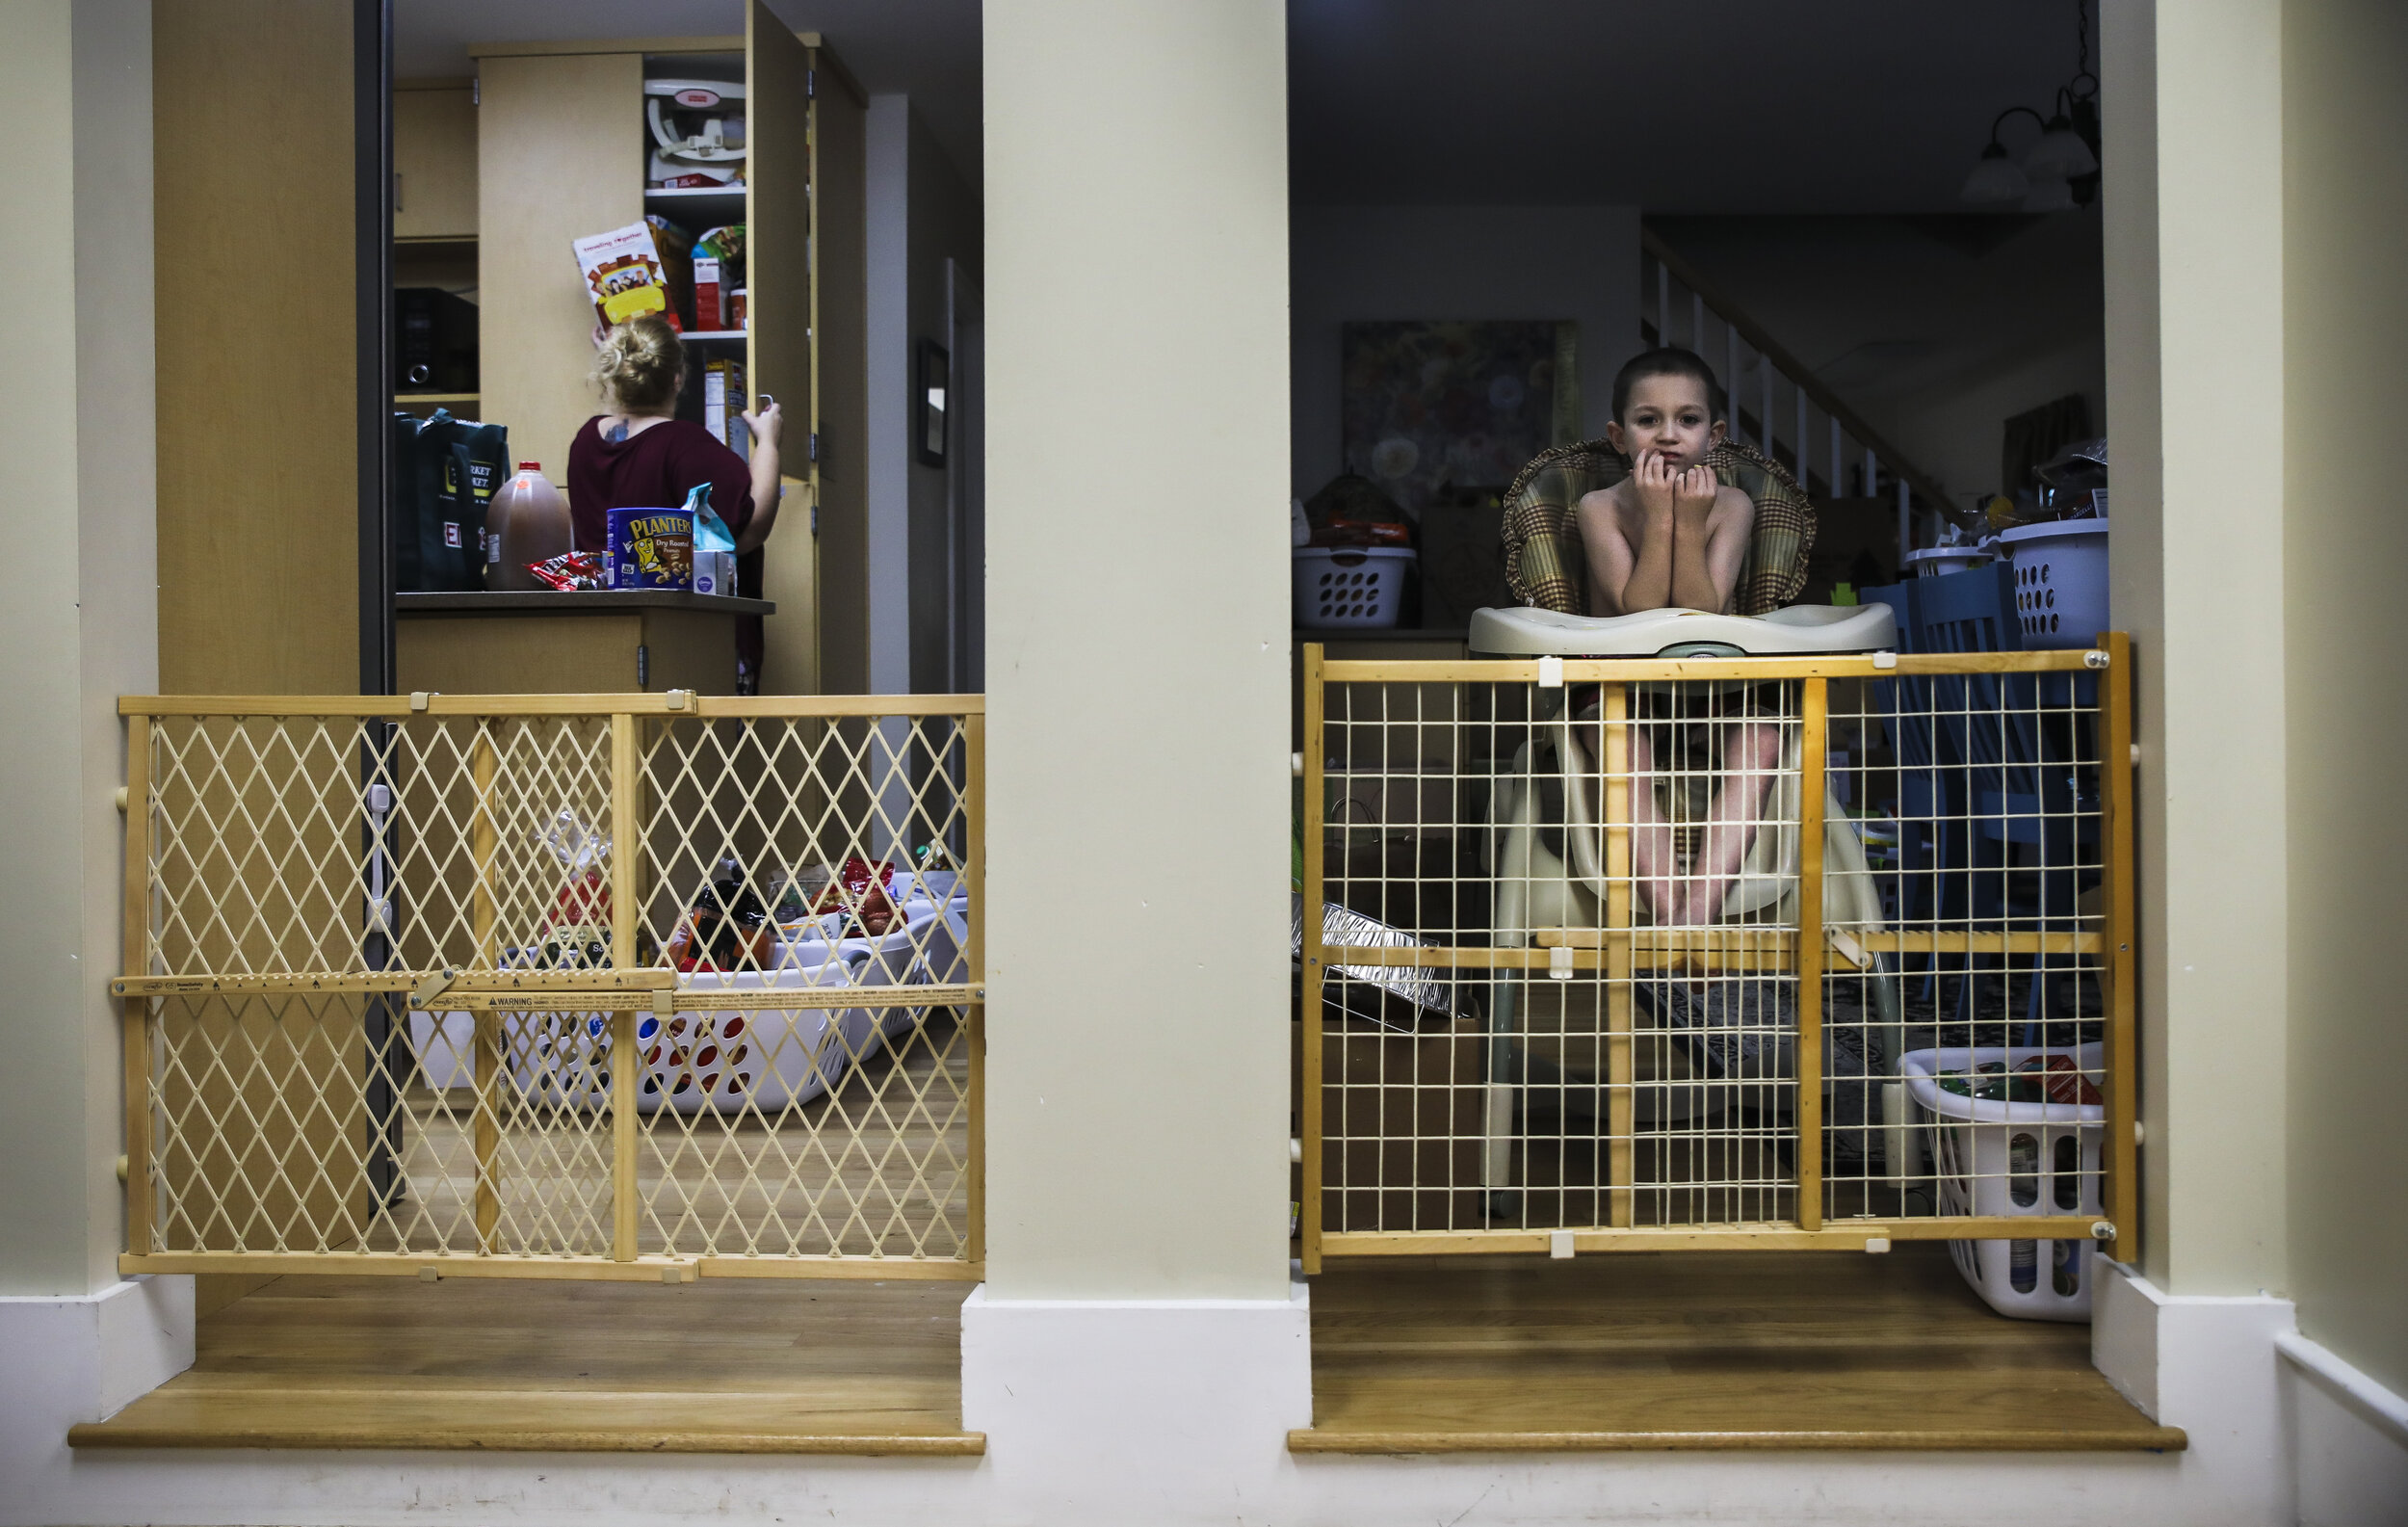 Mariah LeMieux-Lupien  searches for after-school snacks at the Seacoast Family Promise day house while her son Dylan waits in a highchair. For the past three months, the Lupien family has been at Seac